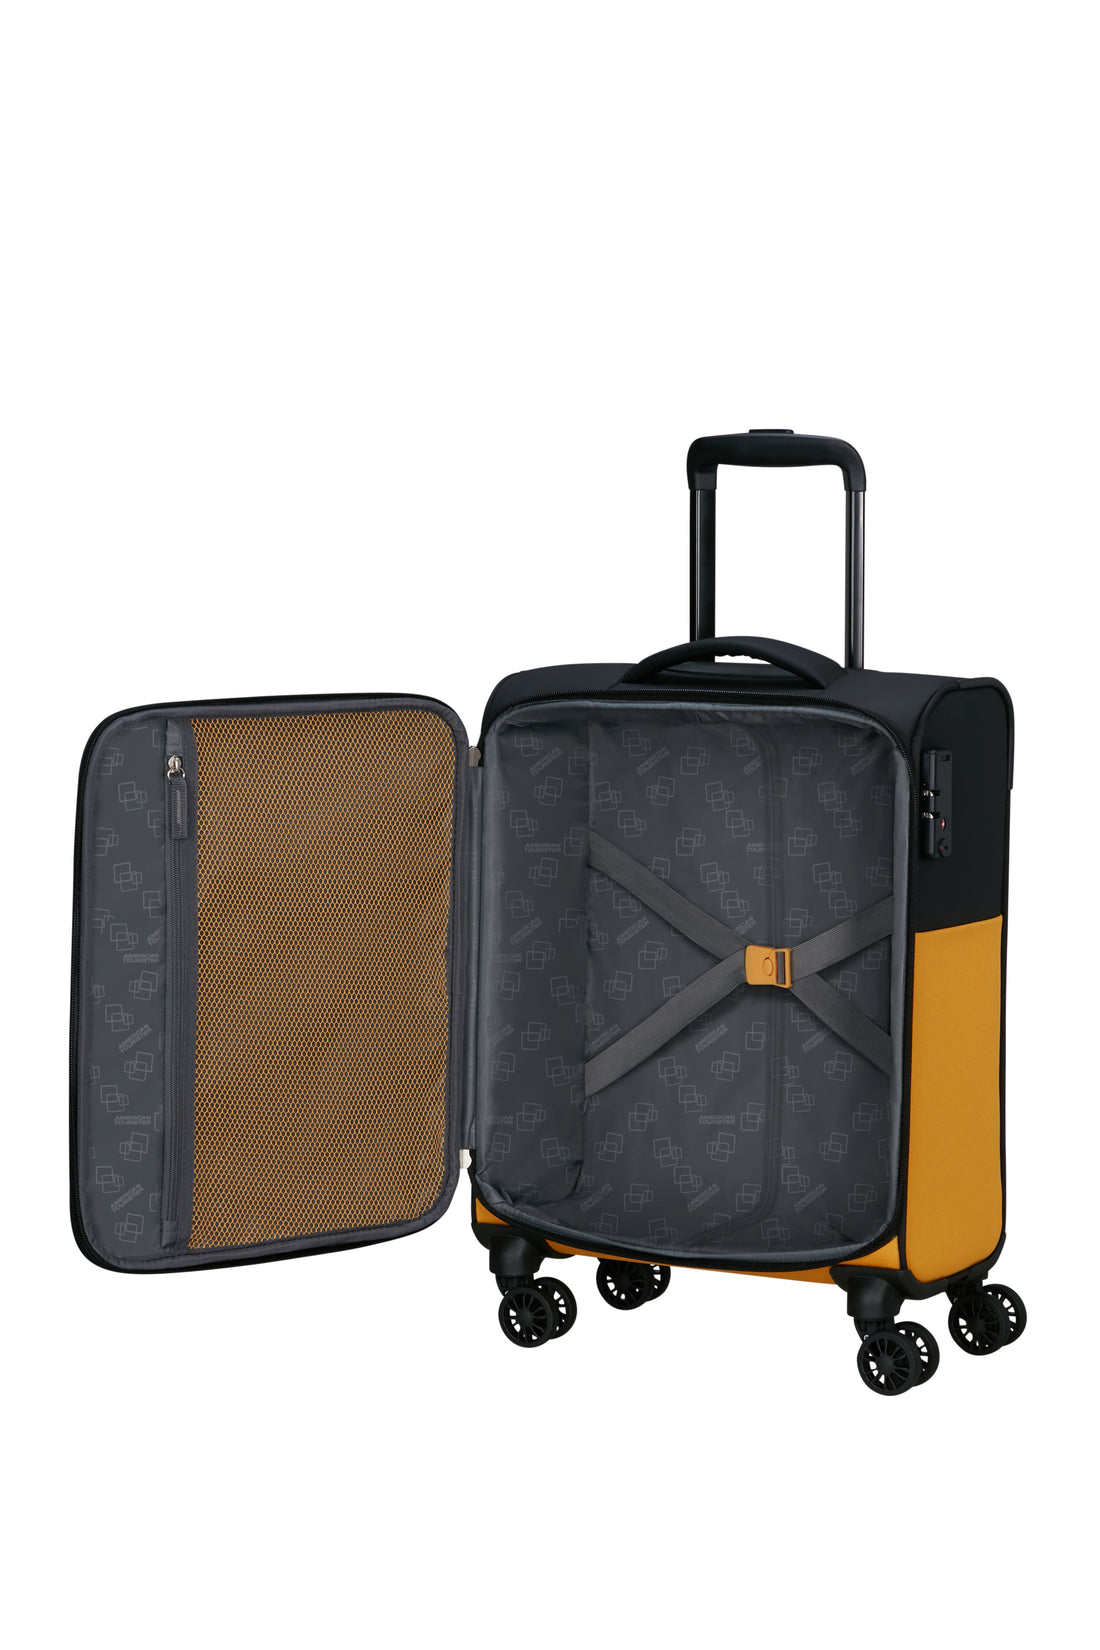 American Tourister Daring Dash Expandable 55cm Spinner